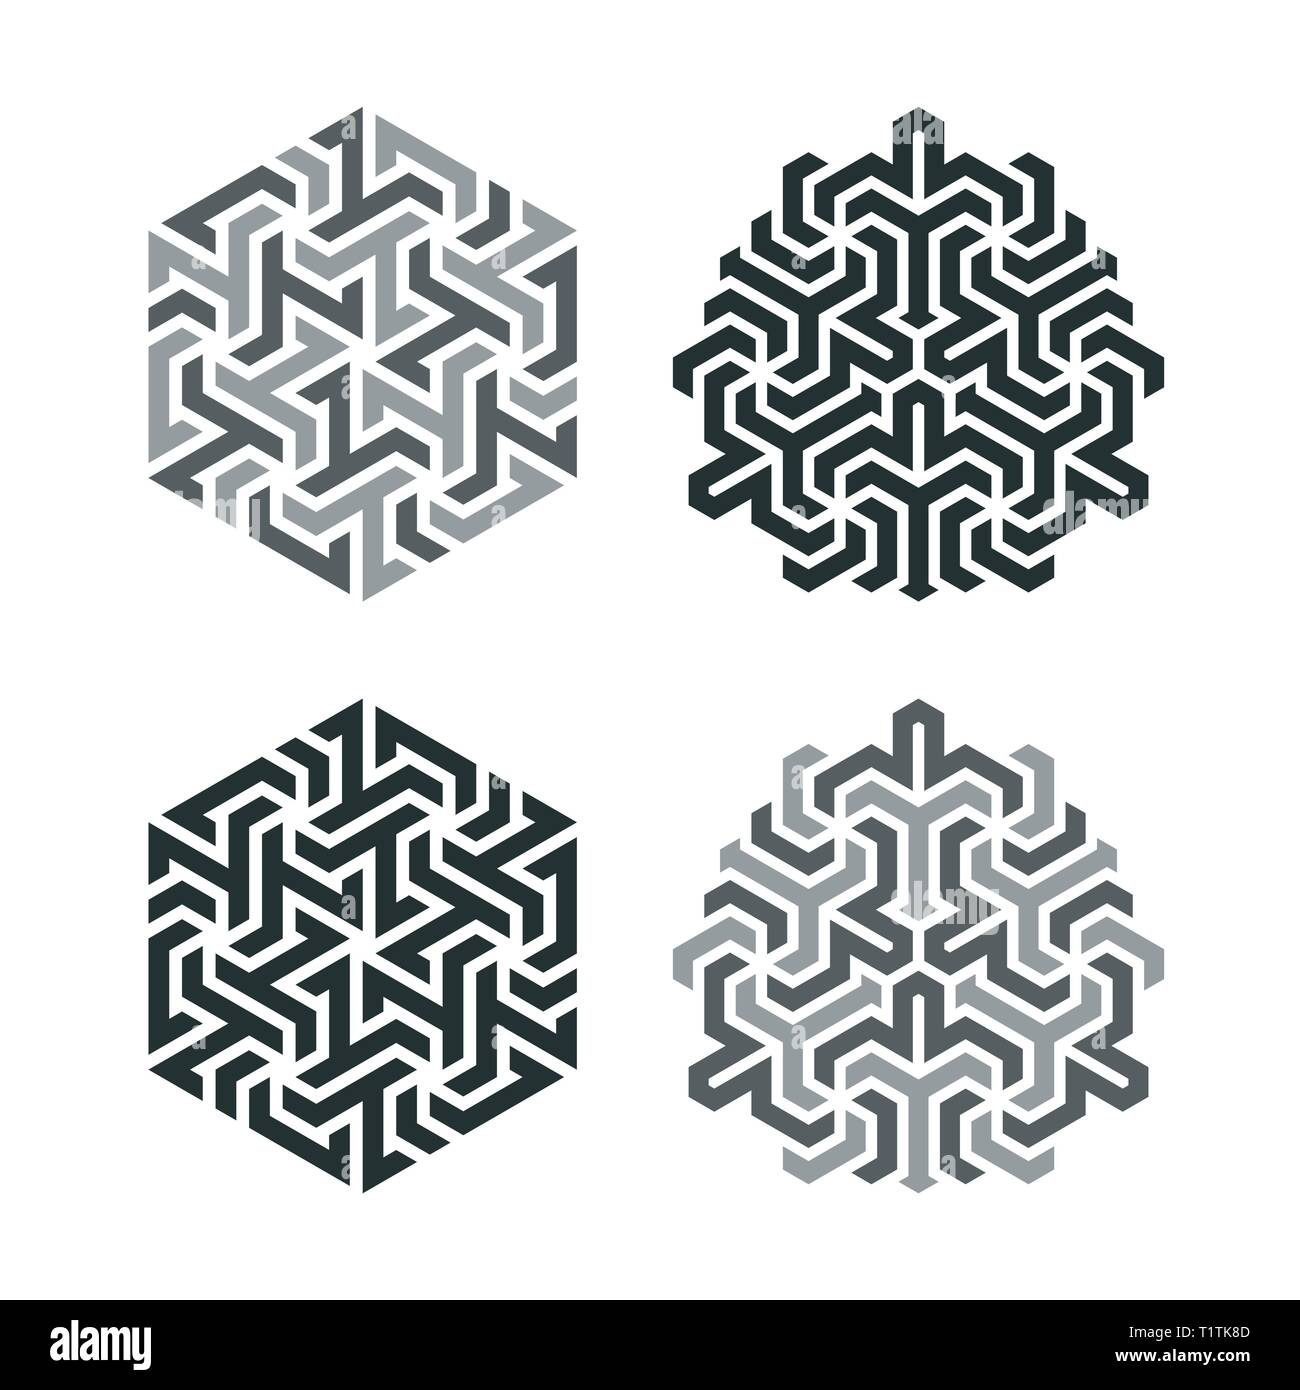 Geometric Tattoos Vector Images (over 36,000)